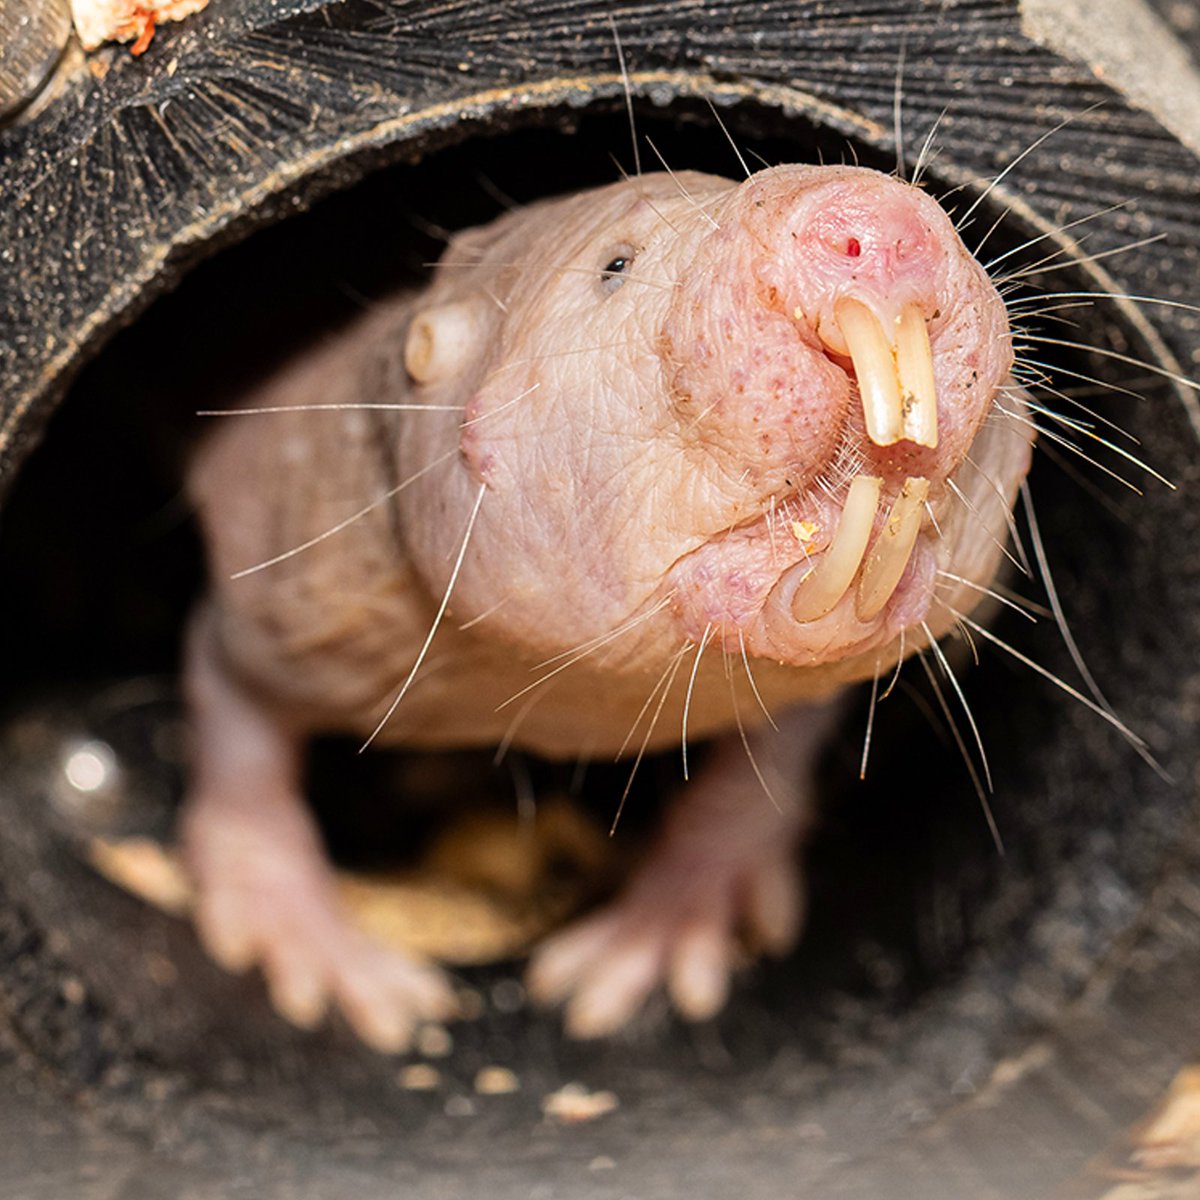 The naked mole-rat, a rodent, hardly shows any signs of ageing, and is resistant to cancer. Its unique biology provides valuable insights for human ageing research.
Its not much of a looker though. #LongevityResearch